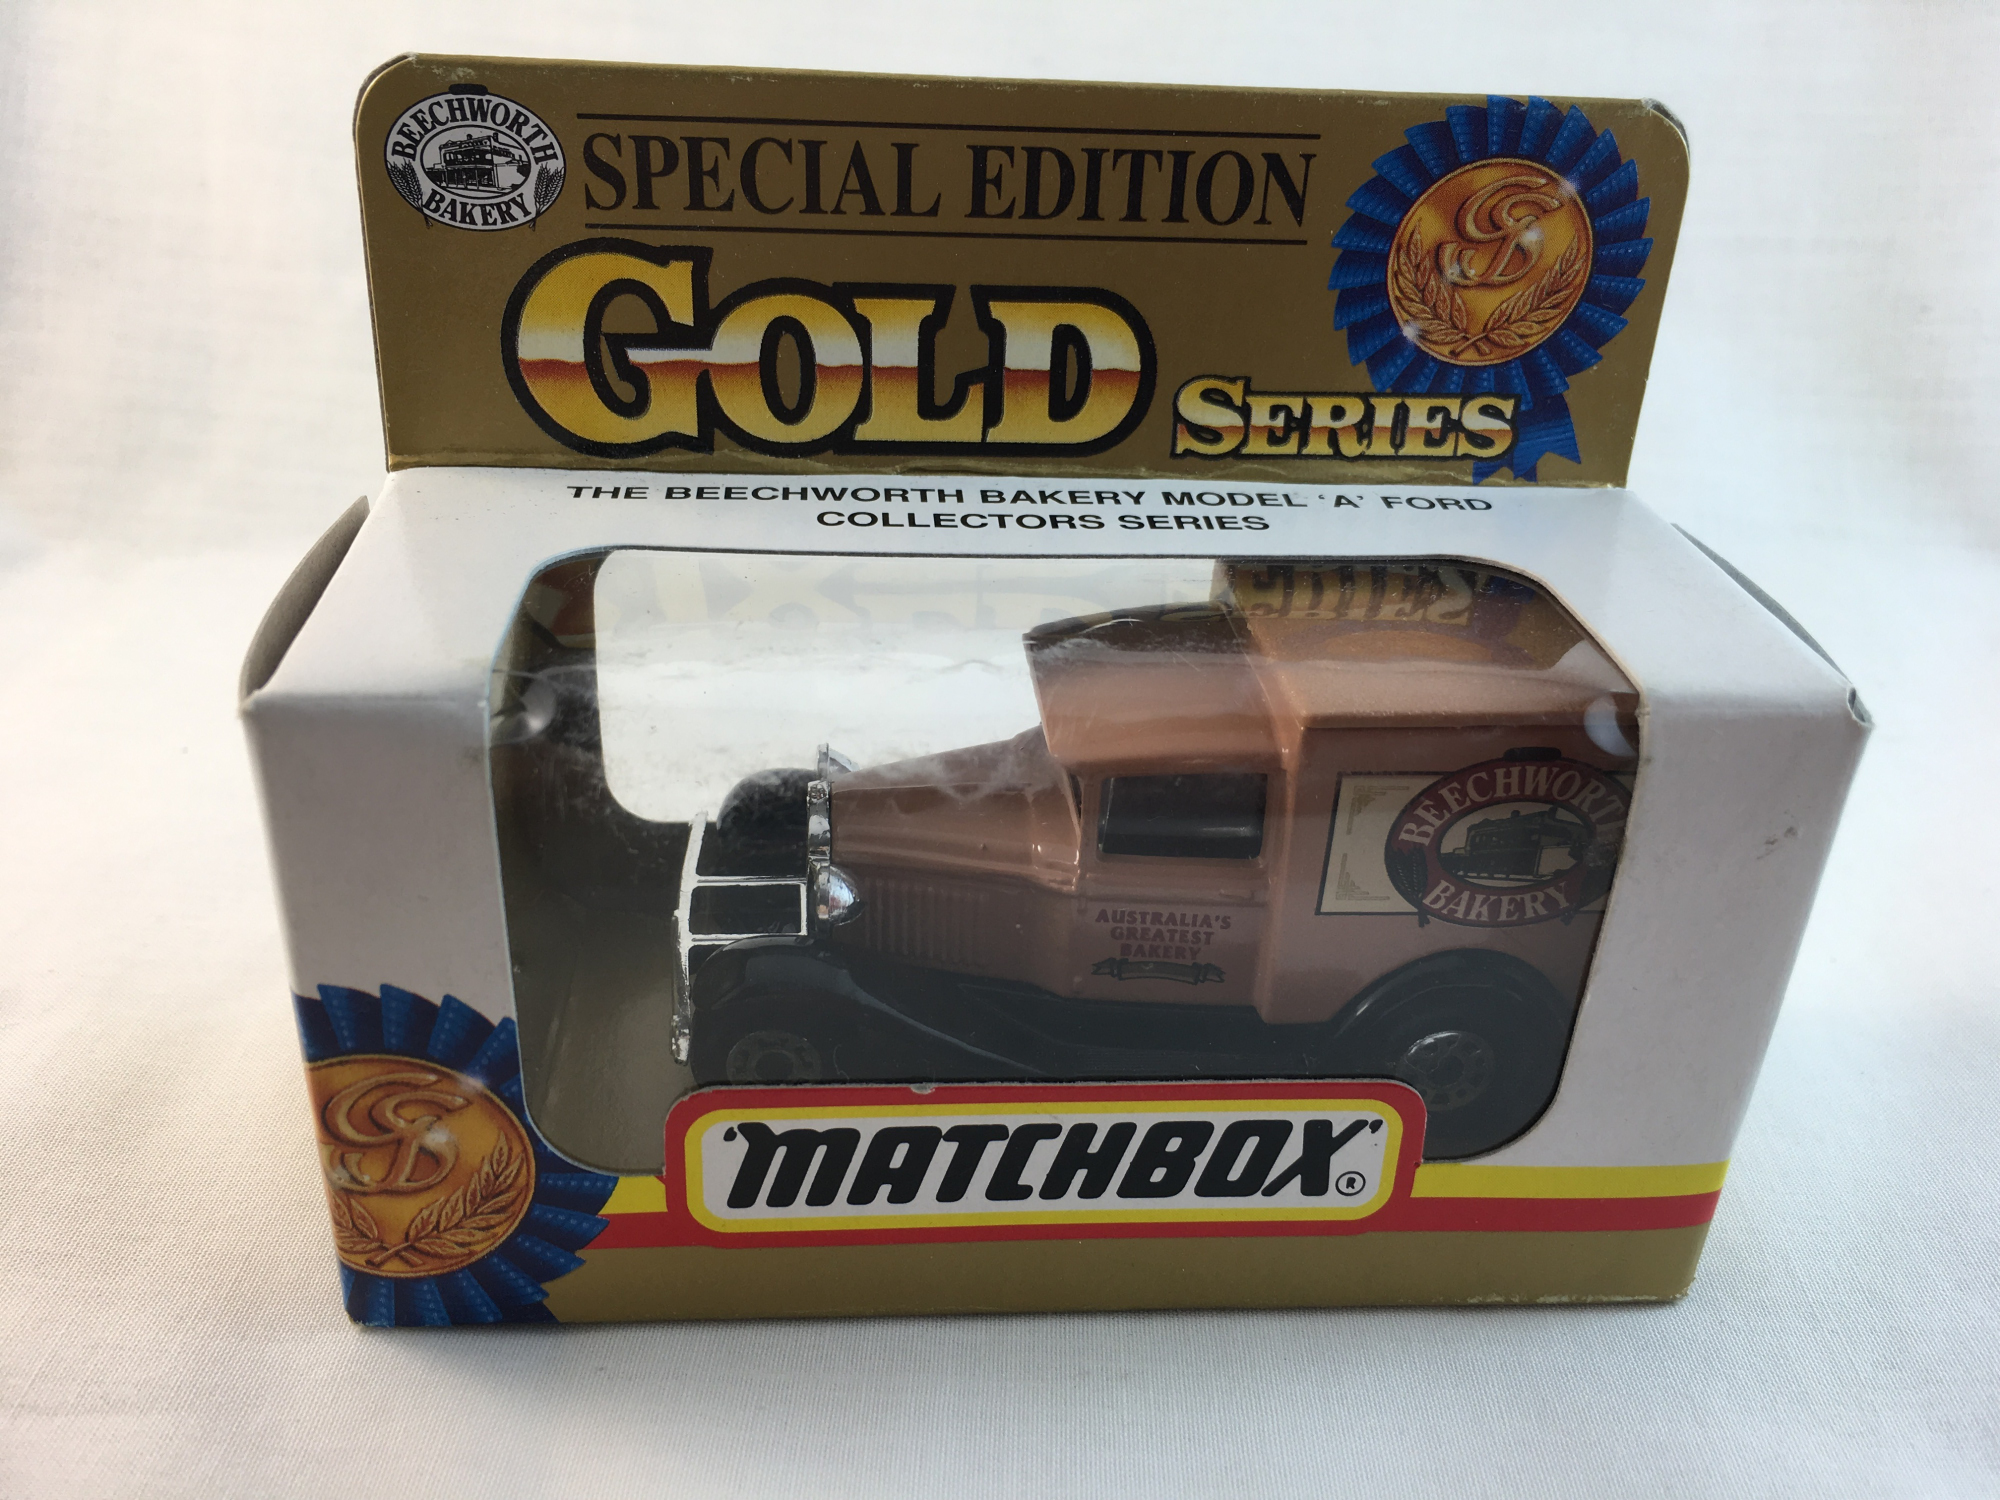 Matchbox-Special Edition Gold Series